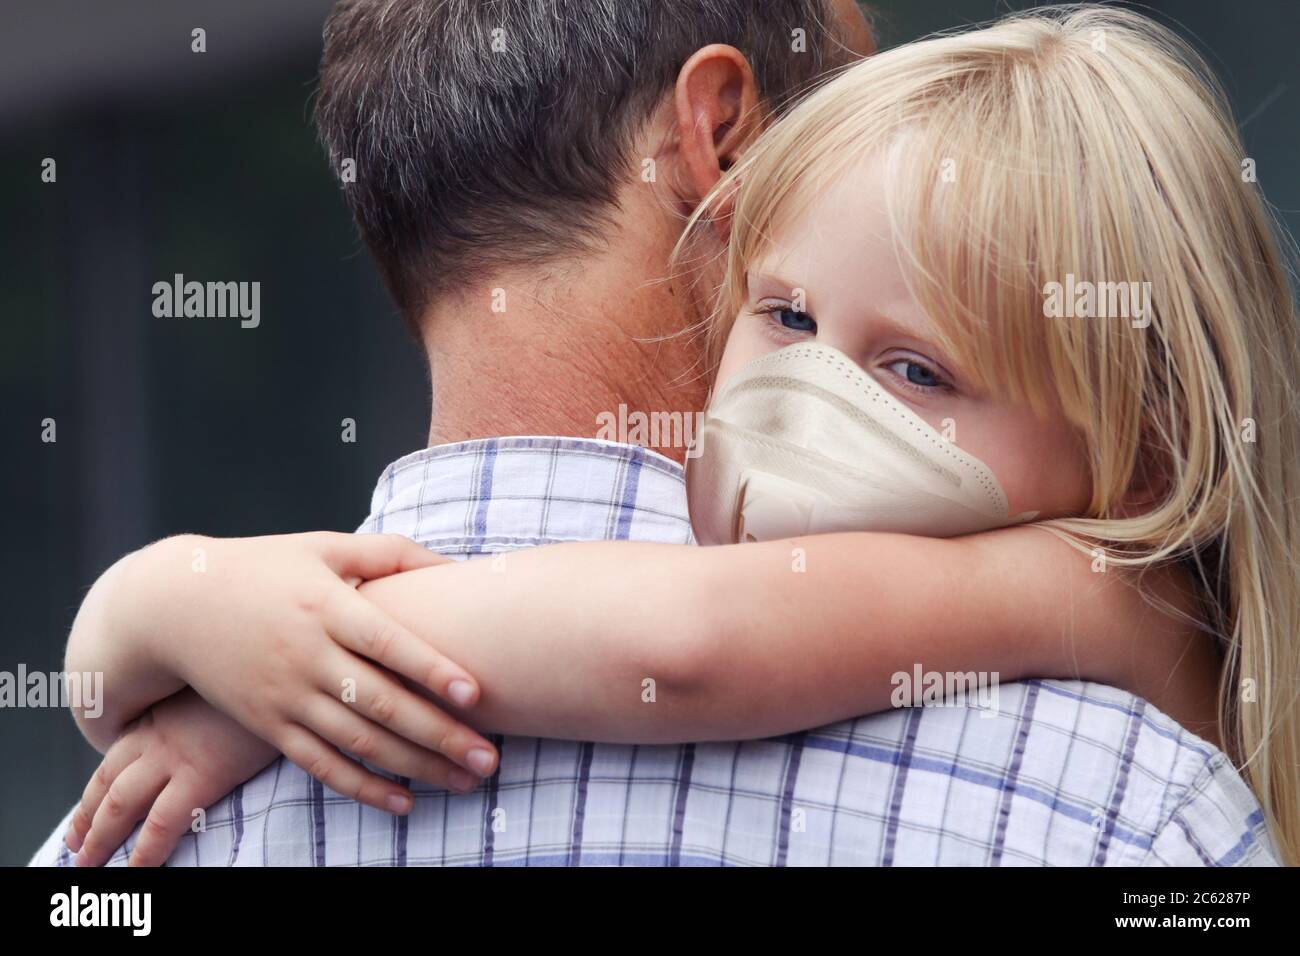 Man carrying child girl in medical face mask Stock Photo